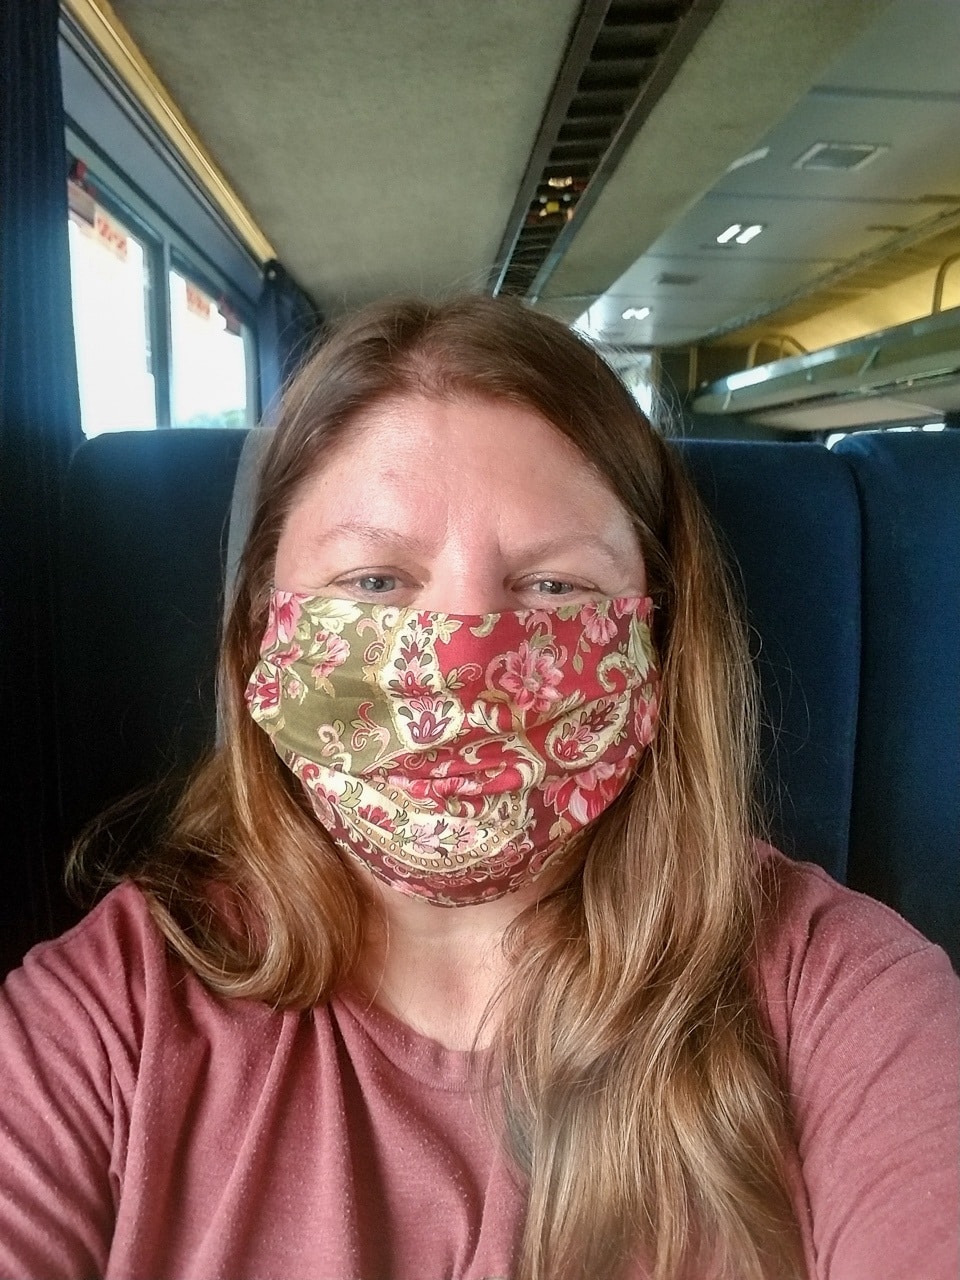 Heather wearing a mask on the Amtrak train